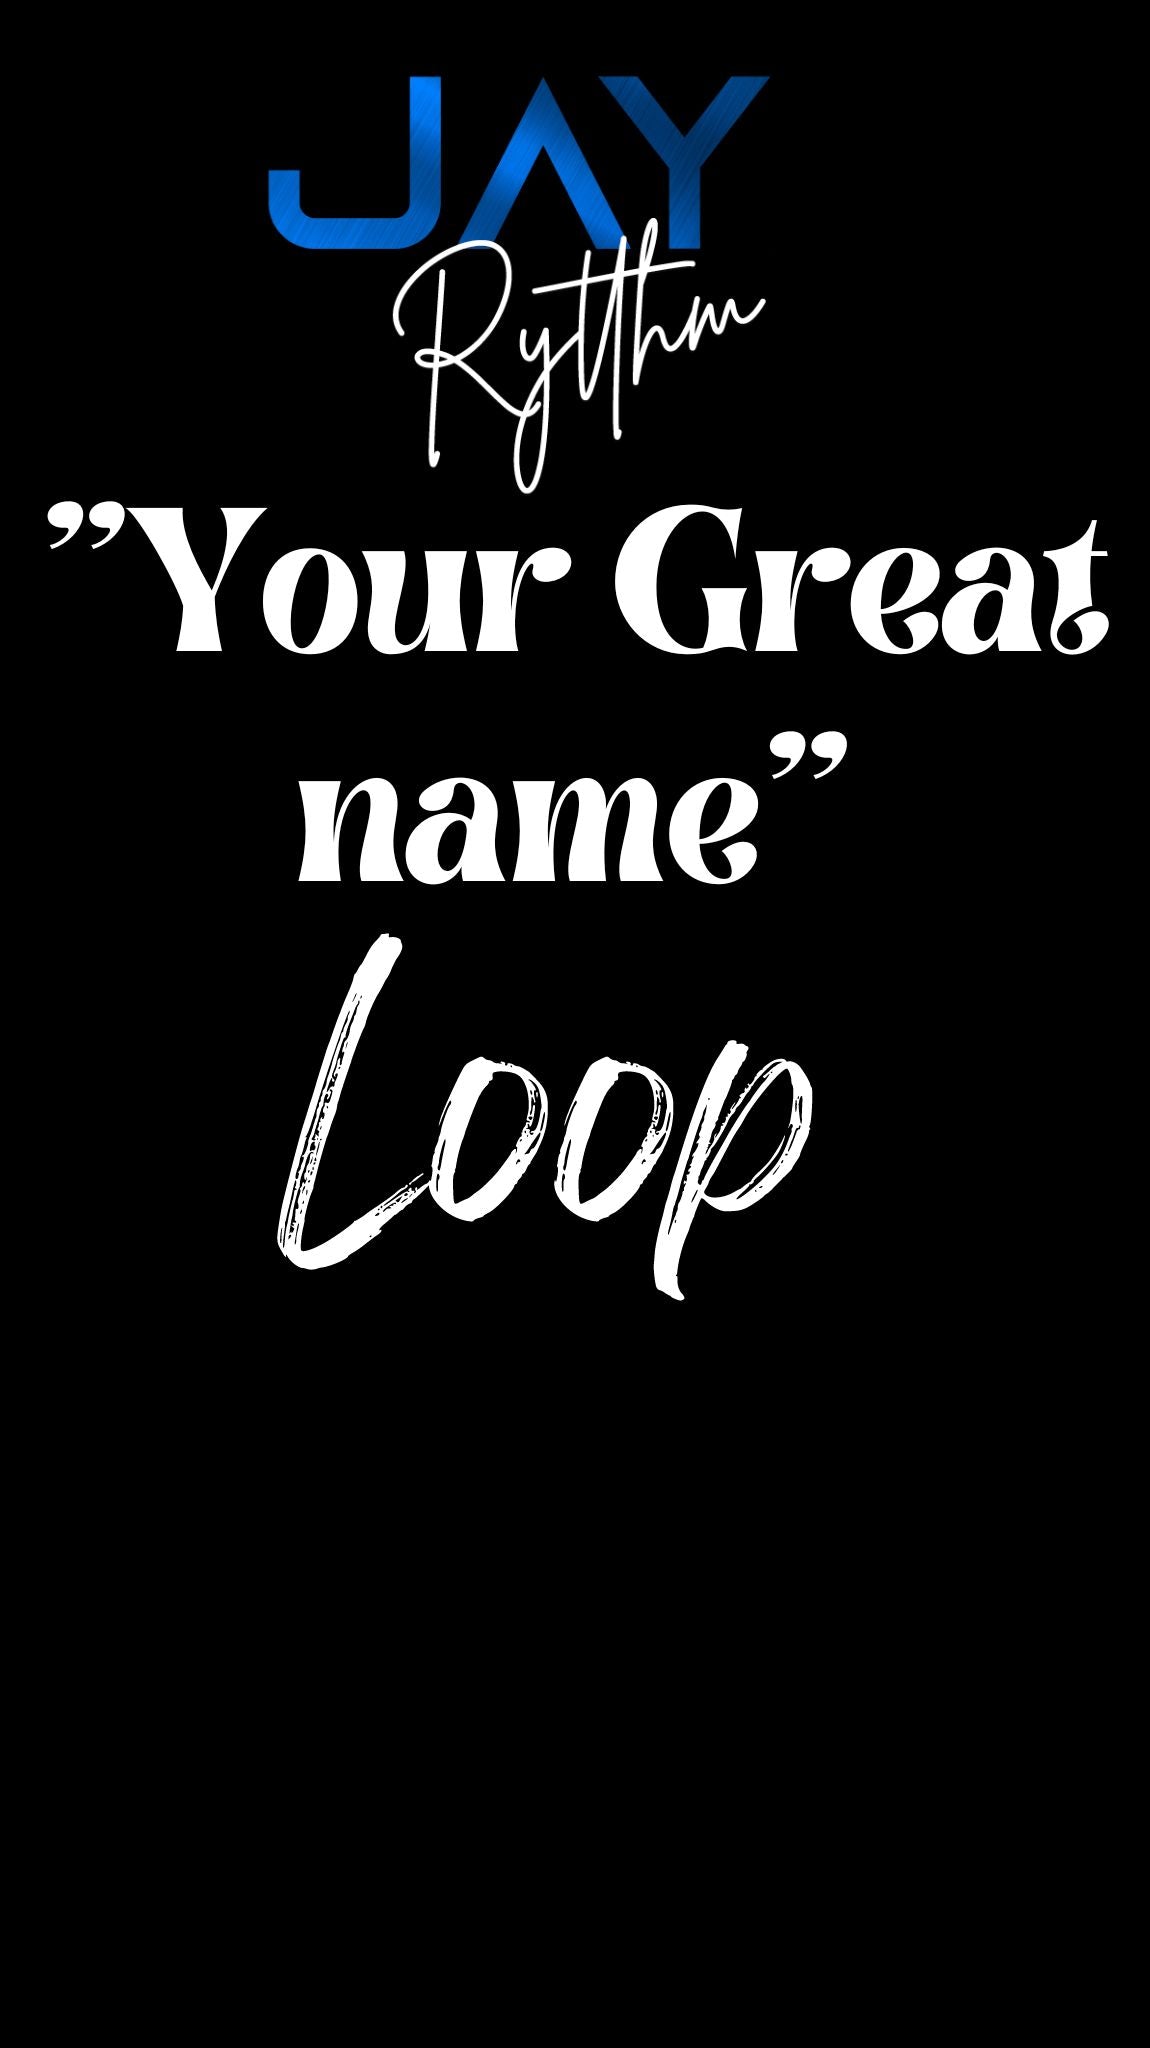 LOOP "YOUR GREAT NAME" 103BPM